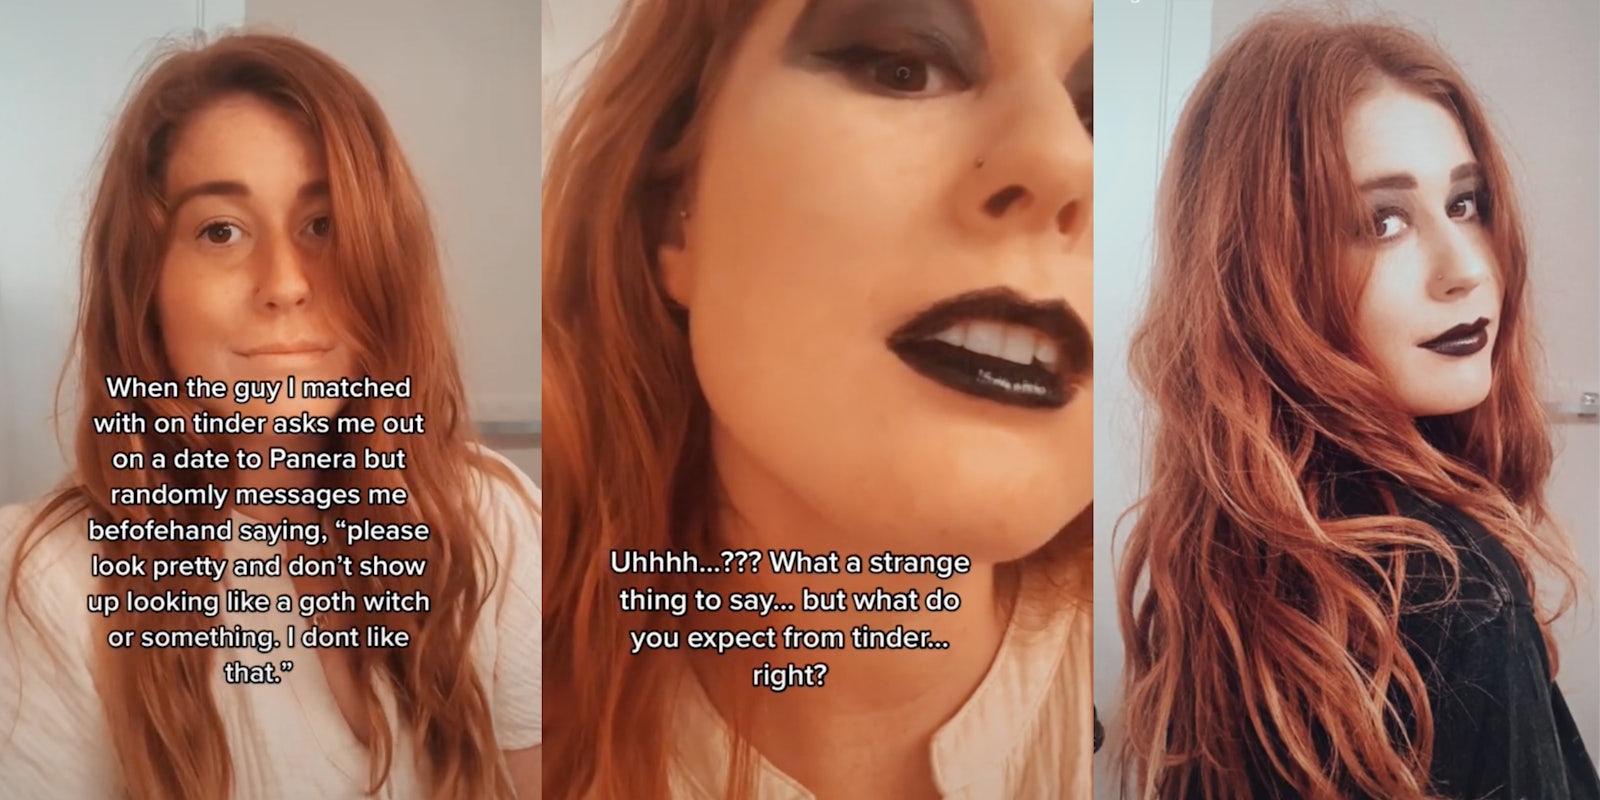 TikToker dresses up as goth witch to spite Tinder date